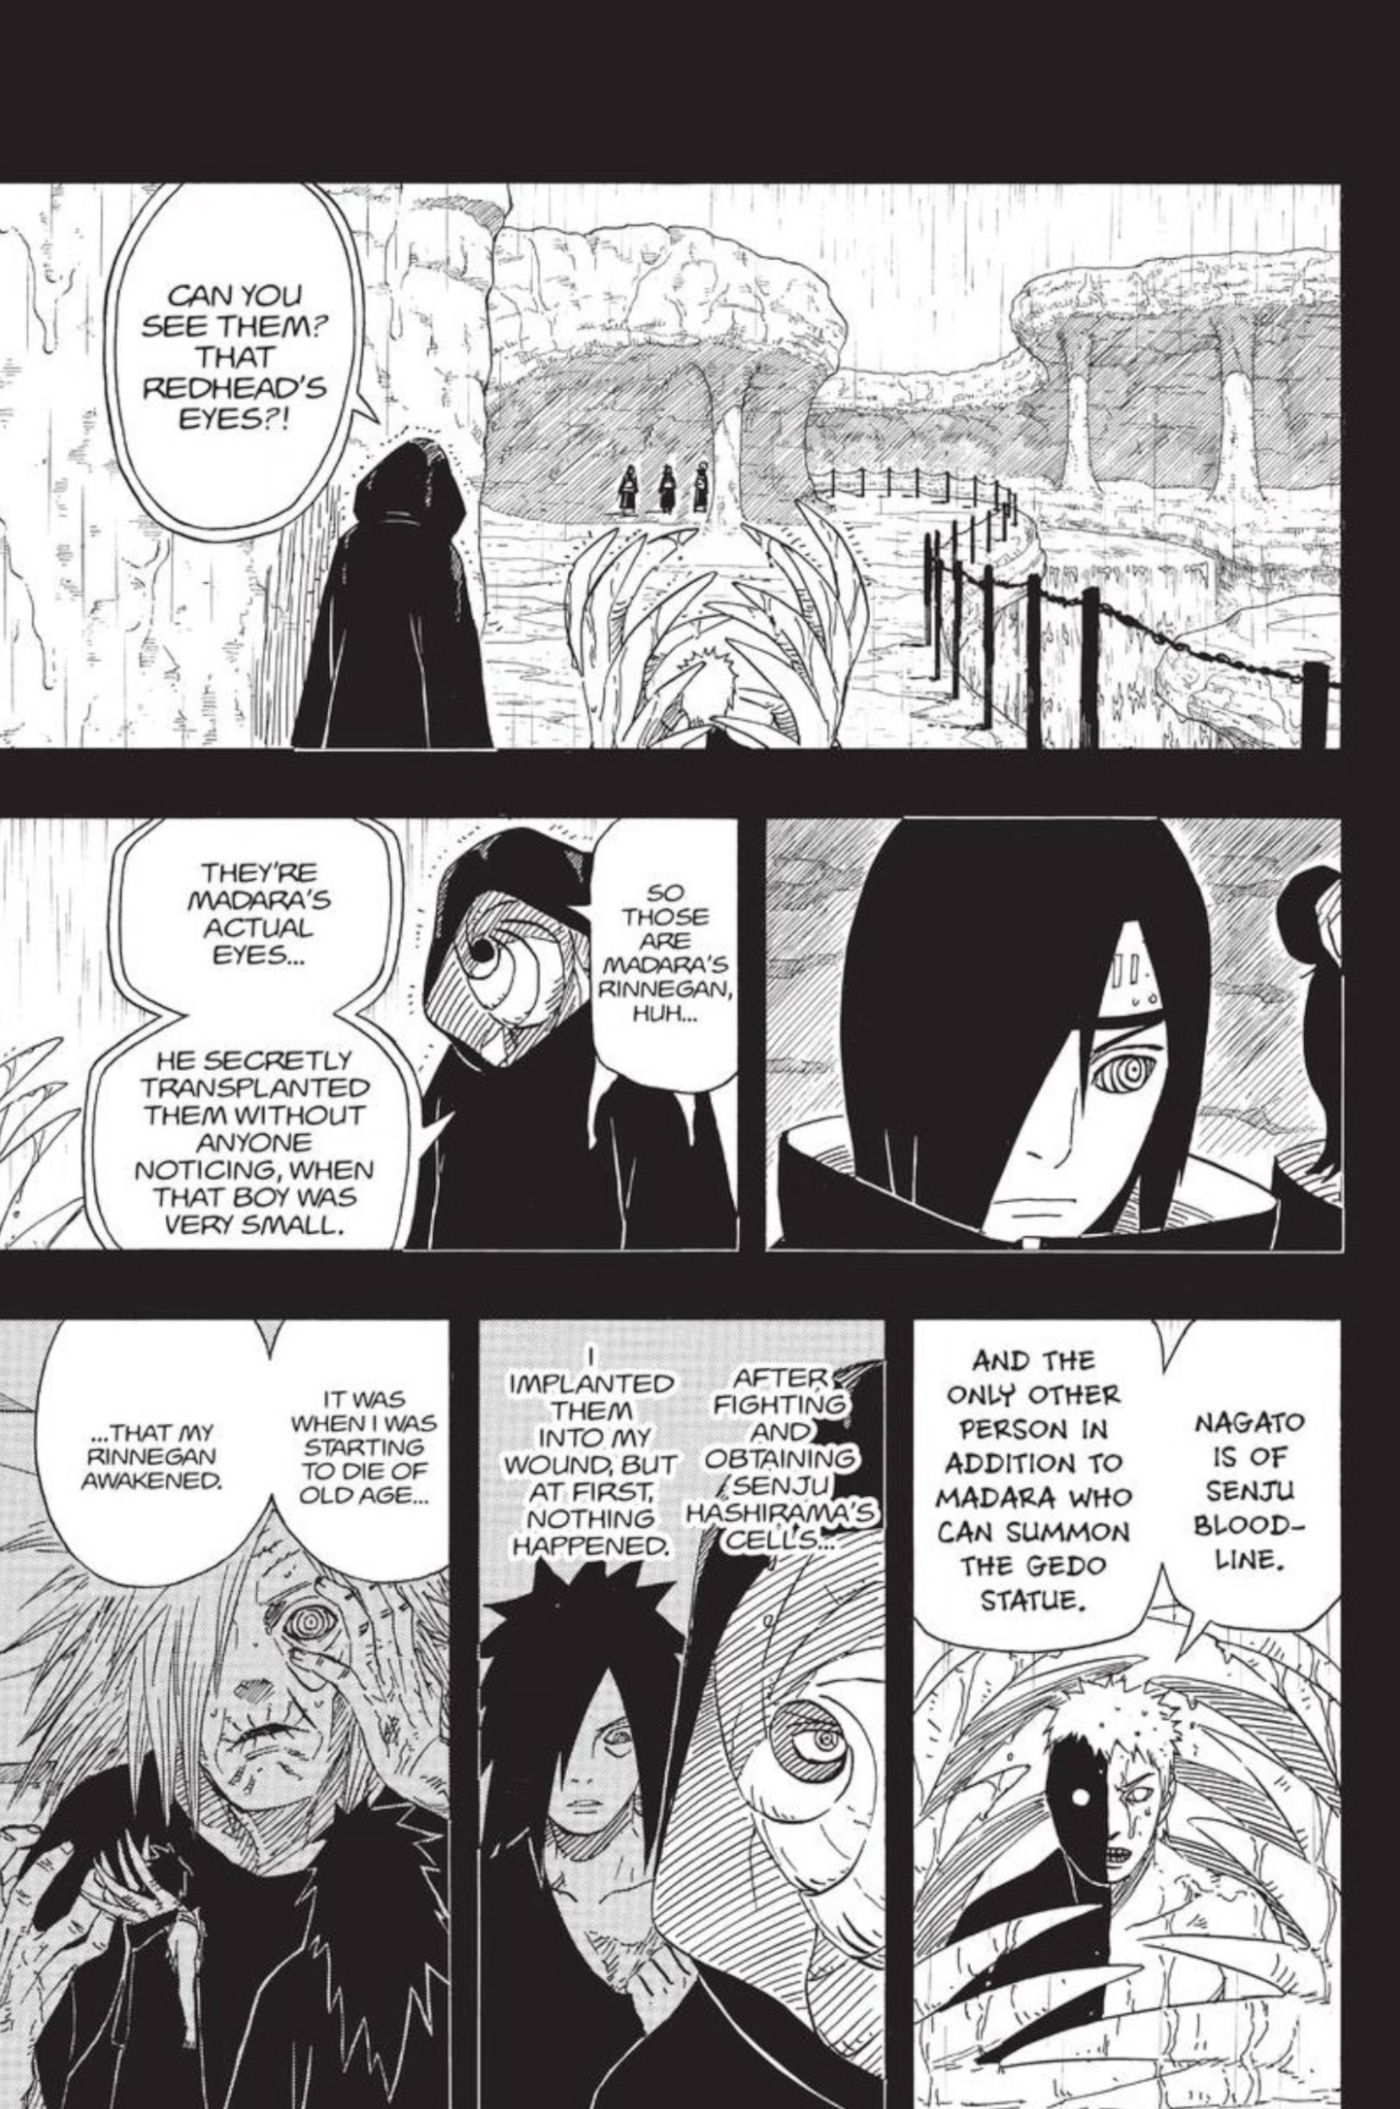 Naruto’s Rinnegan Explained: How Madara Unlocked Them And Their Powers